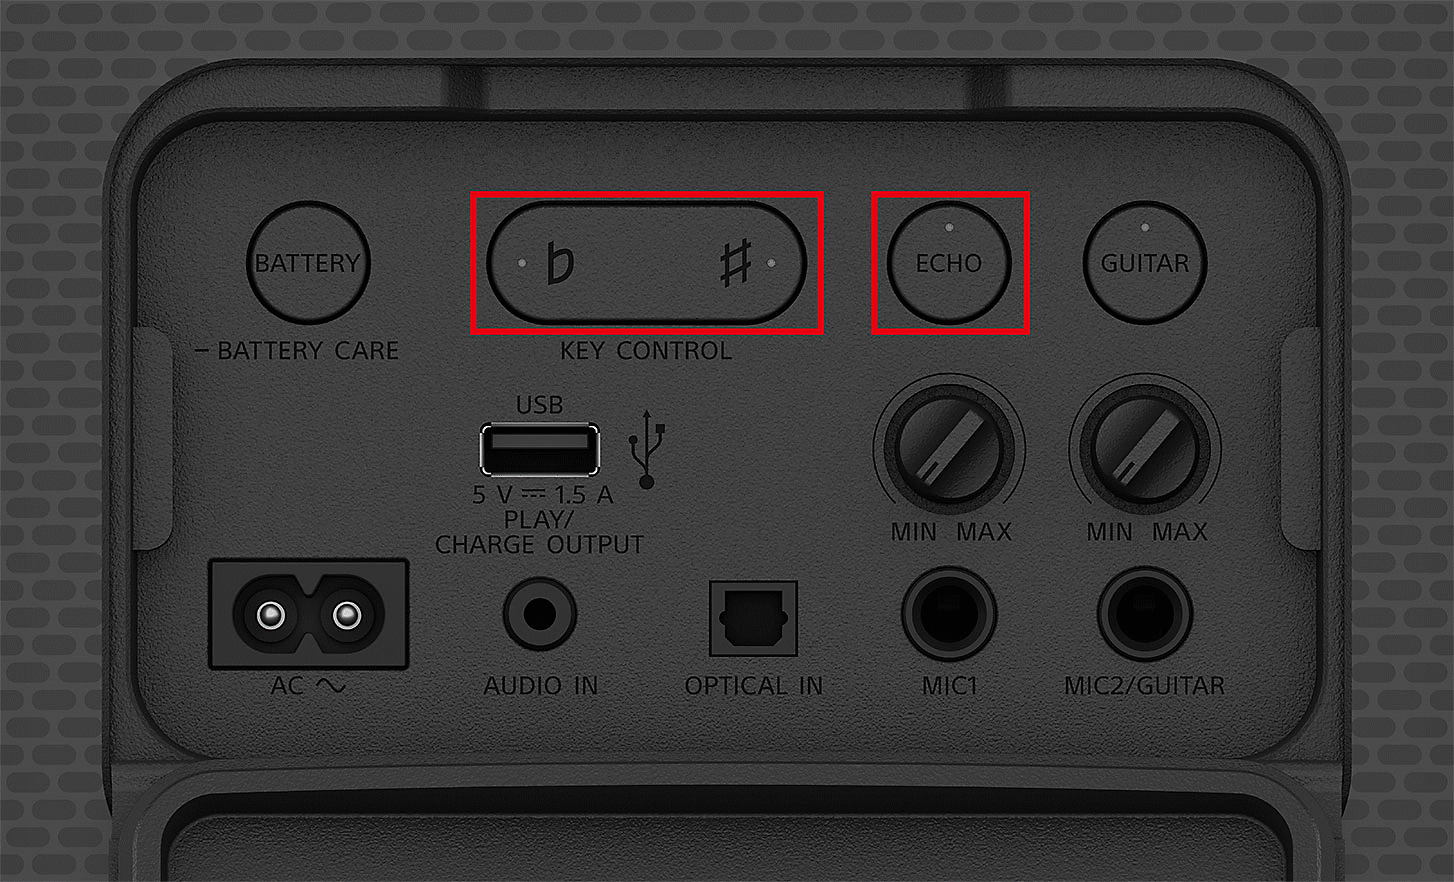 Close up image of the SRS-XV800 control panel. The Echo and Key Control buttons are highlighted by red boxes